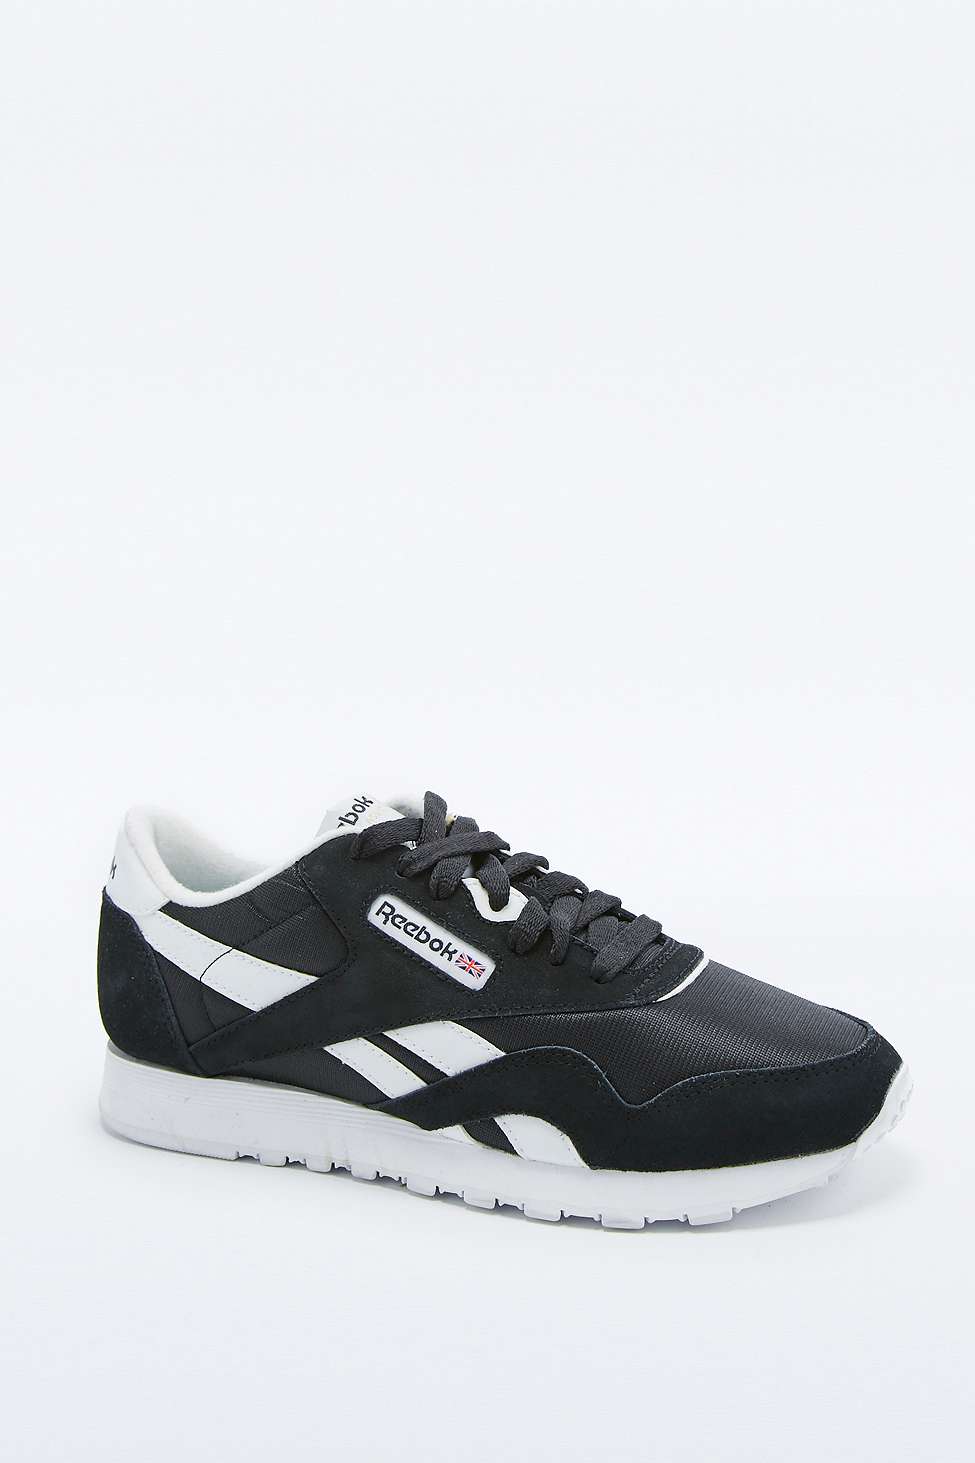 Reebok Classic Black and White Trainers